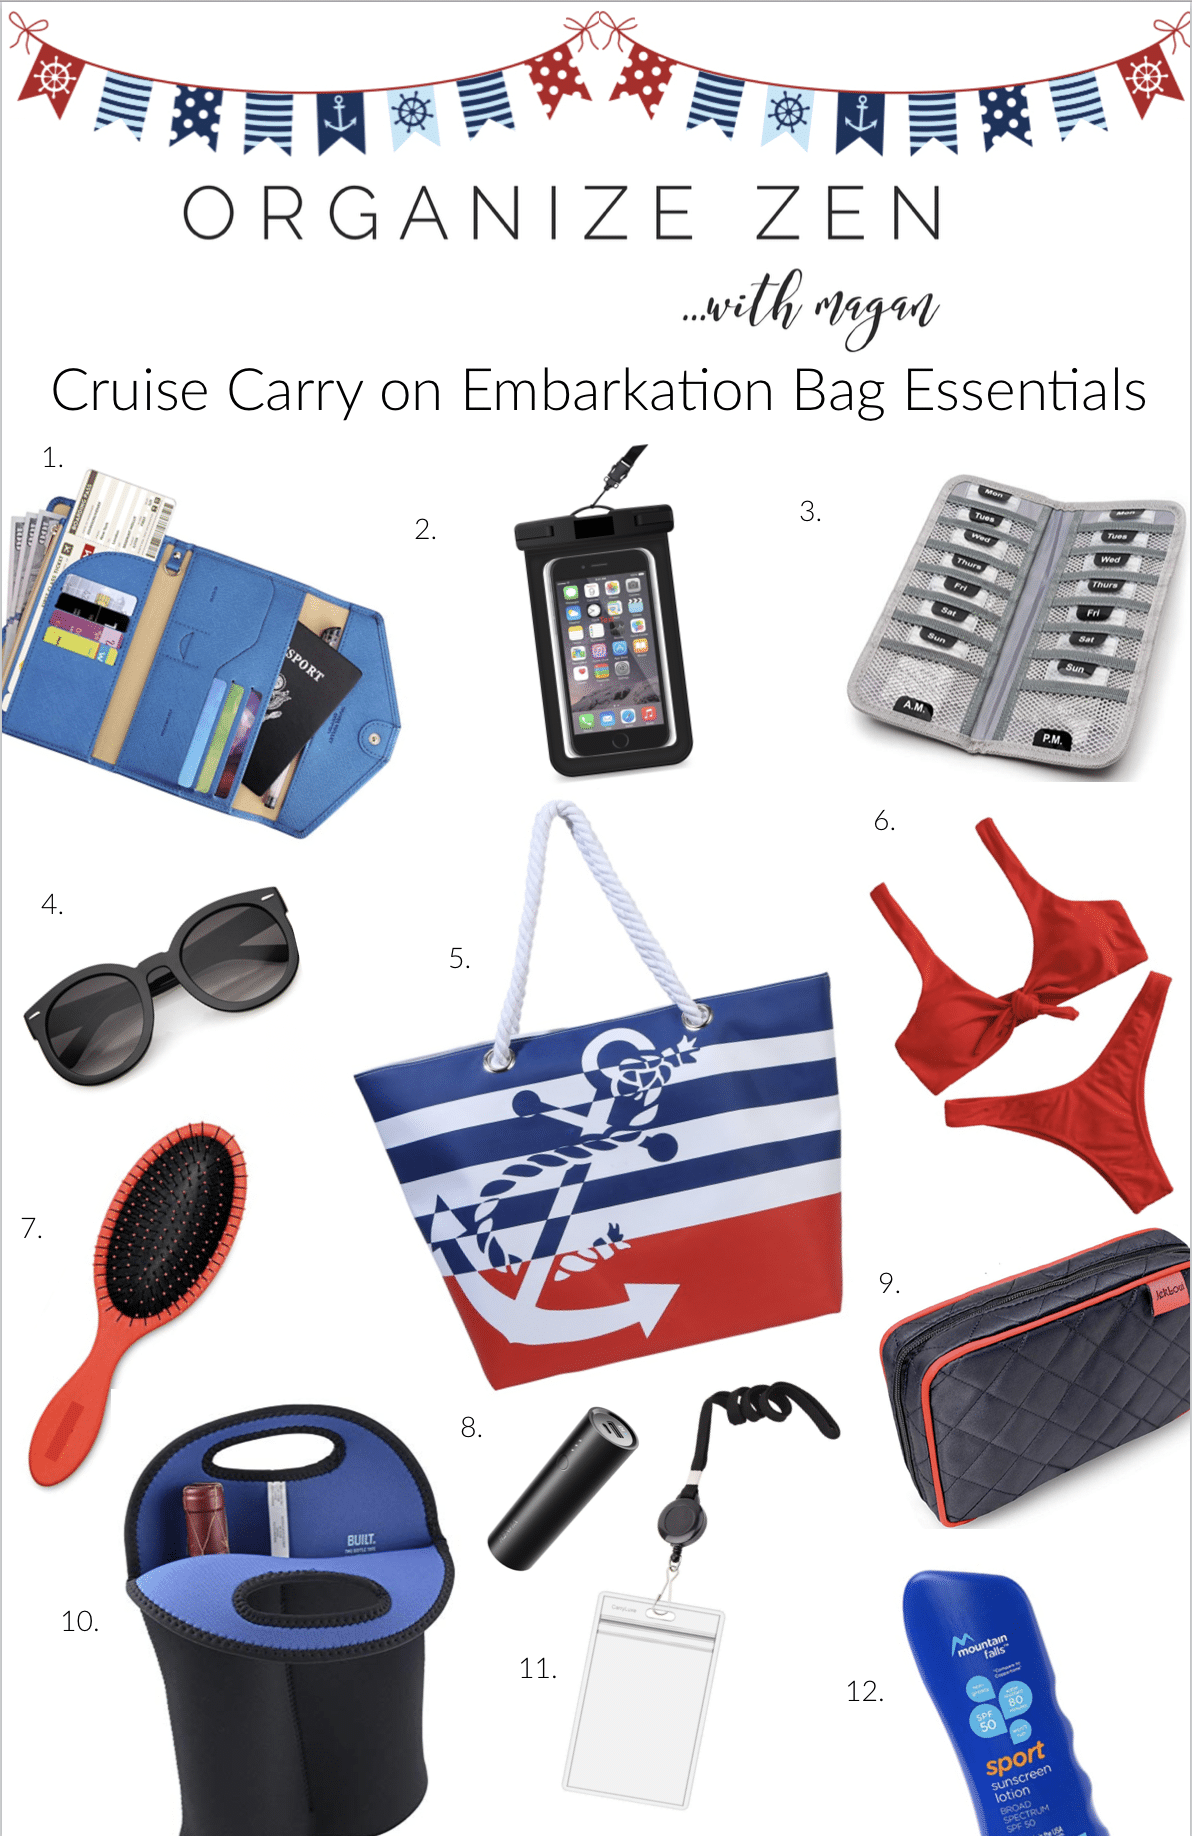 Cruise carry on embarkation day bag essentials